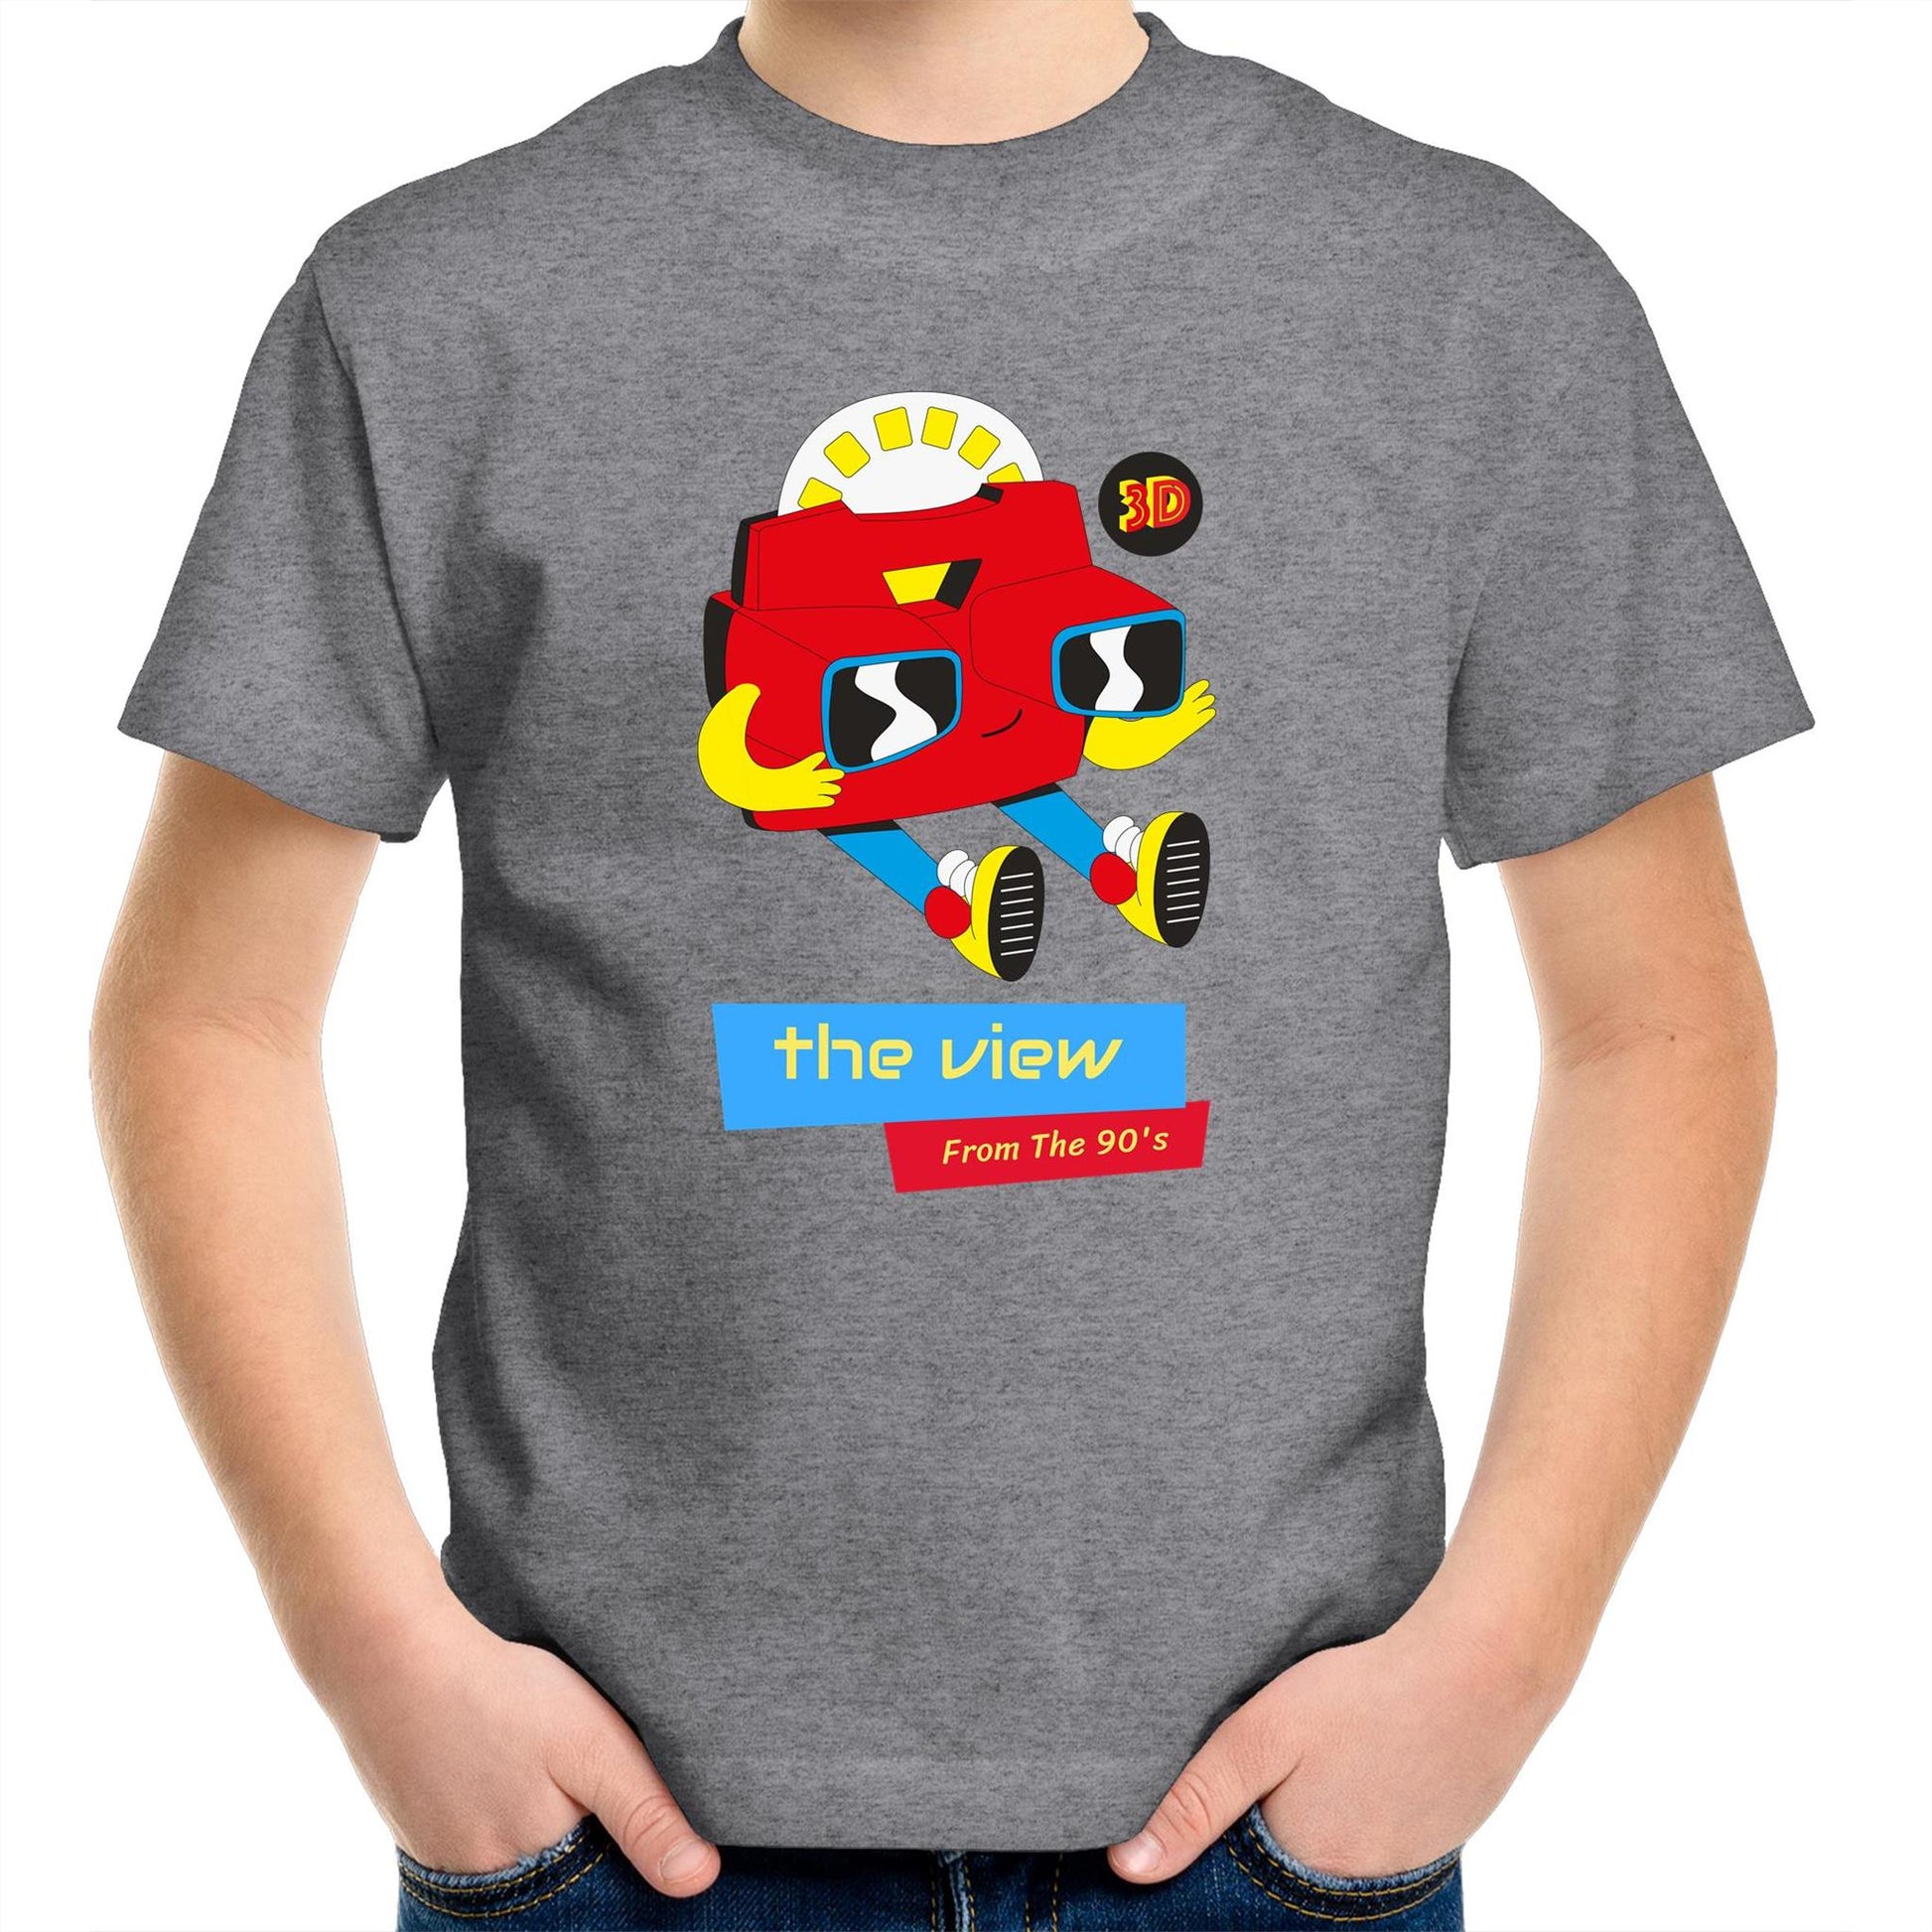 The View From The 90's - Kids Youth Crew T-Shirt Grey Marle Kids Youth T-shirt Retro